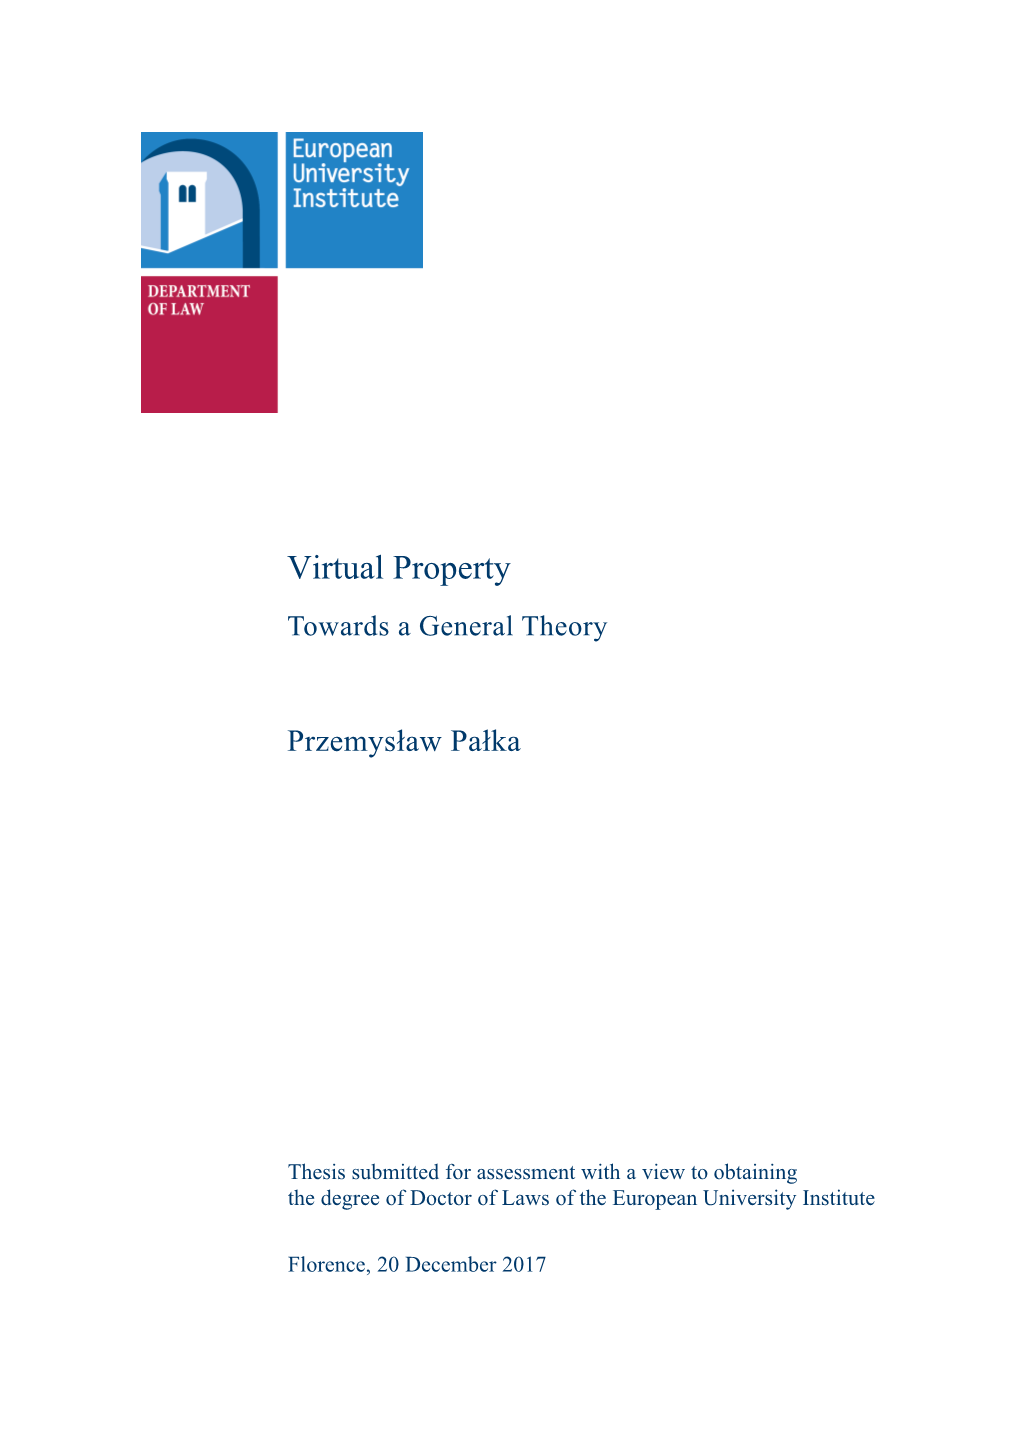 Virtual Property Towards a General Theory